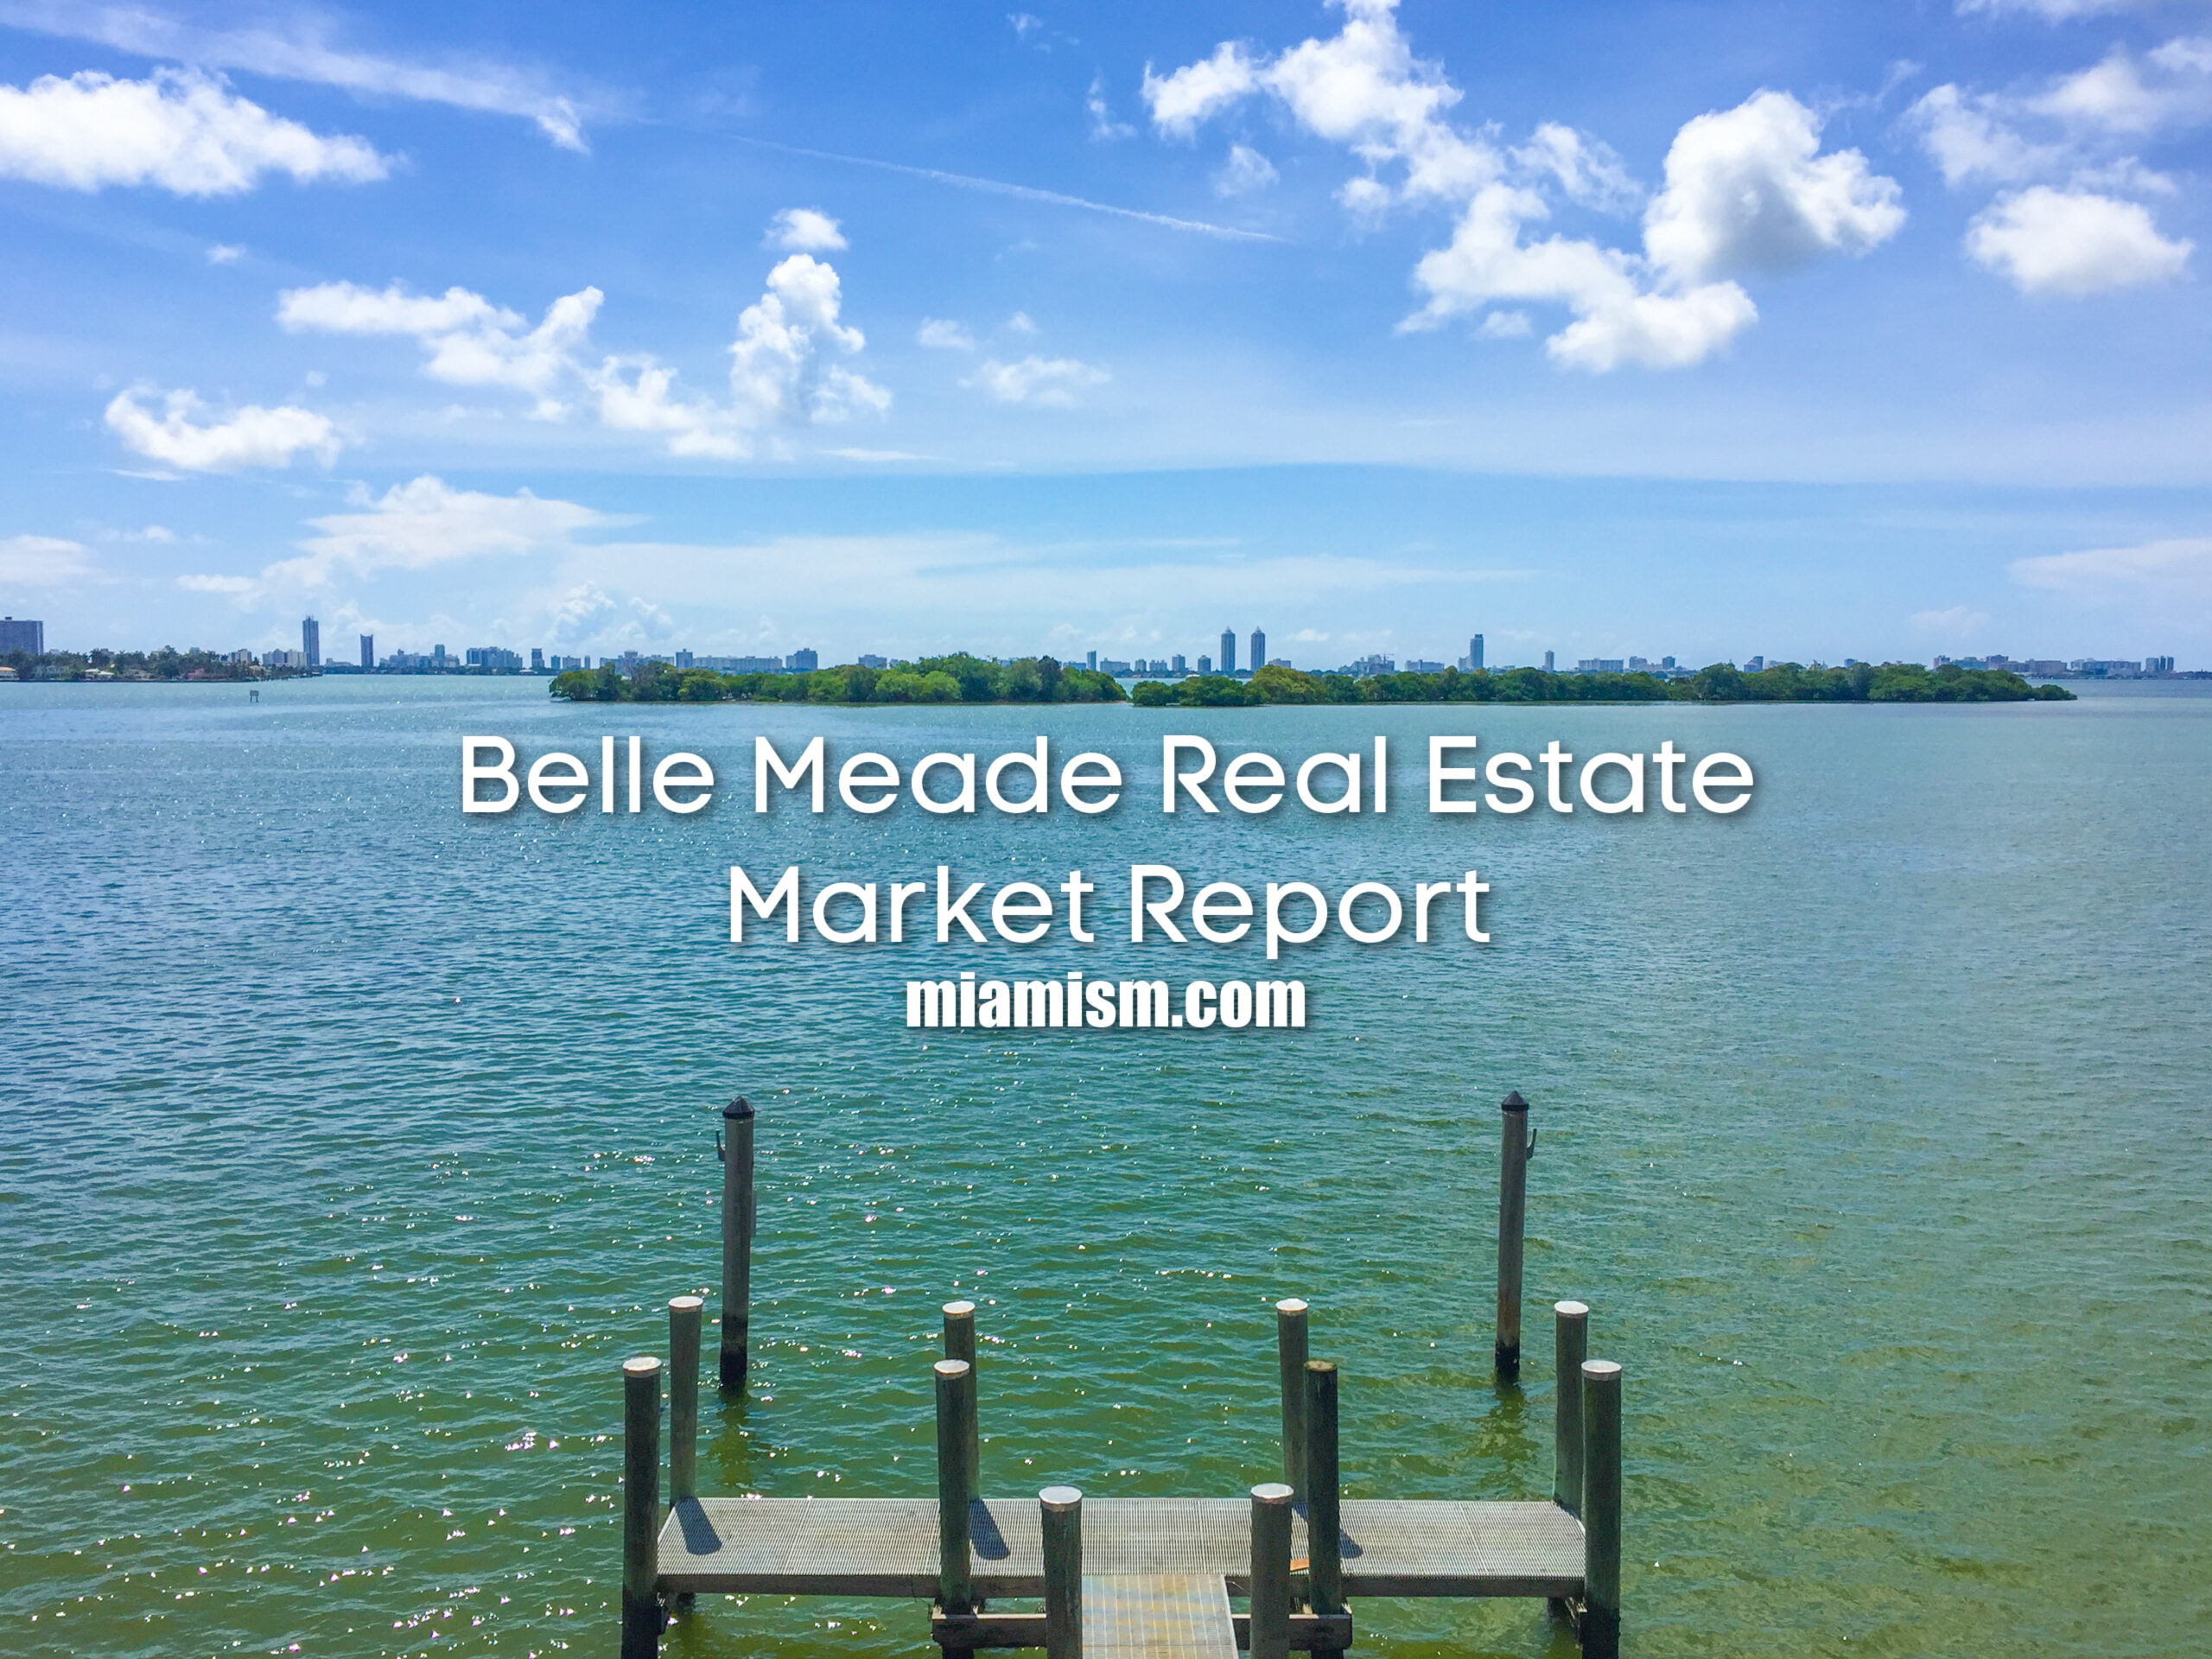 belle meade real estate market report by miamism